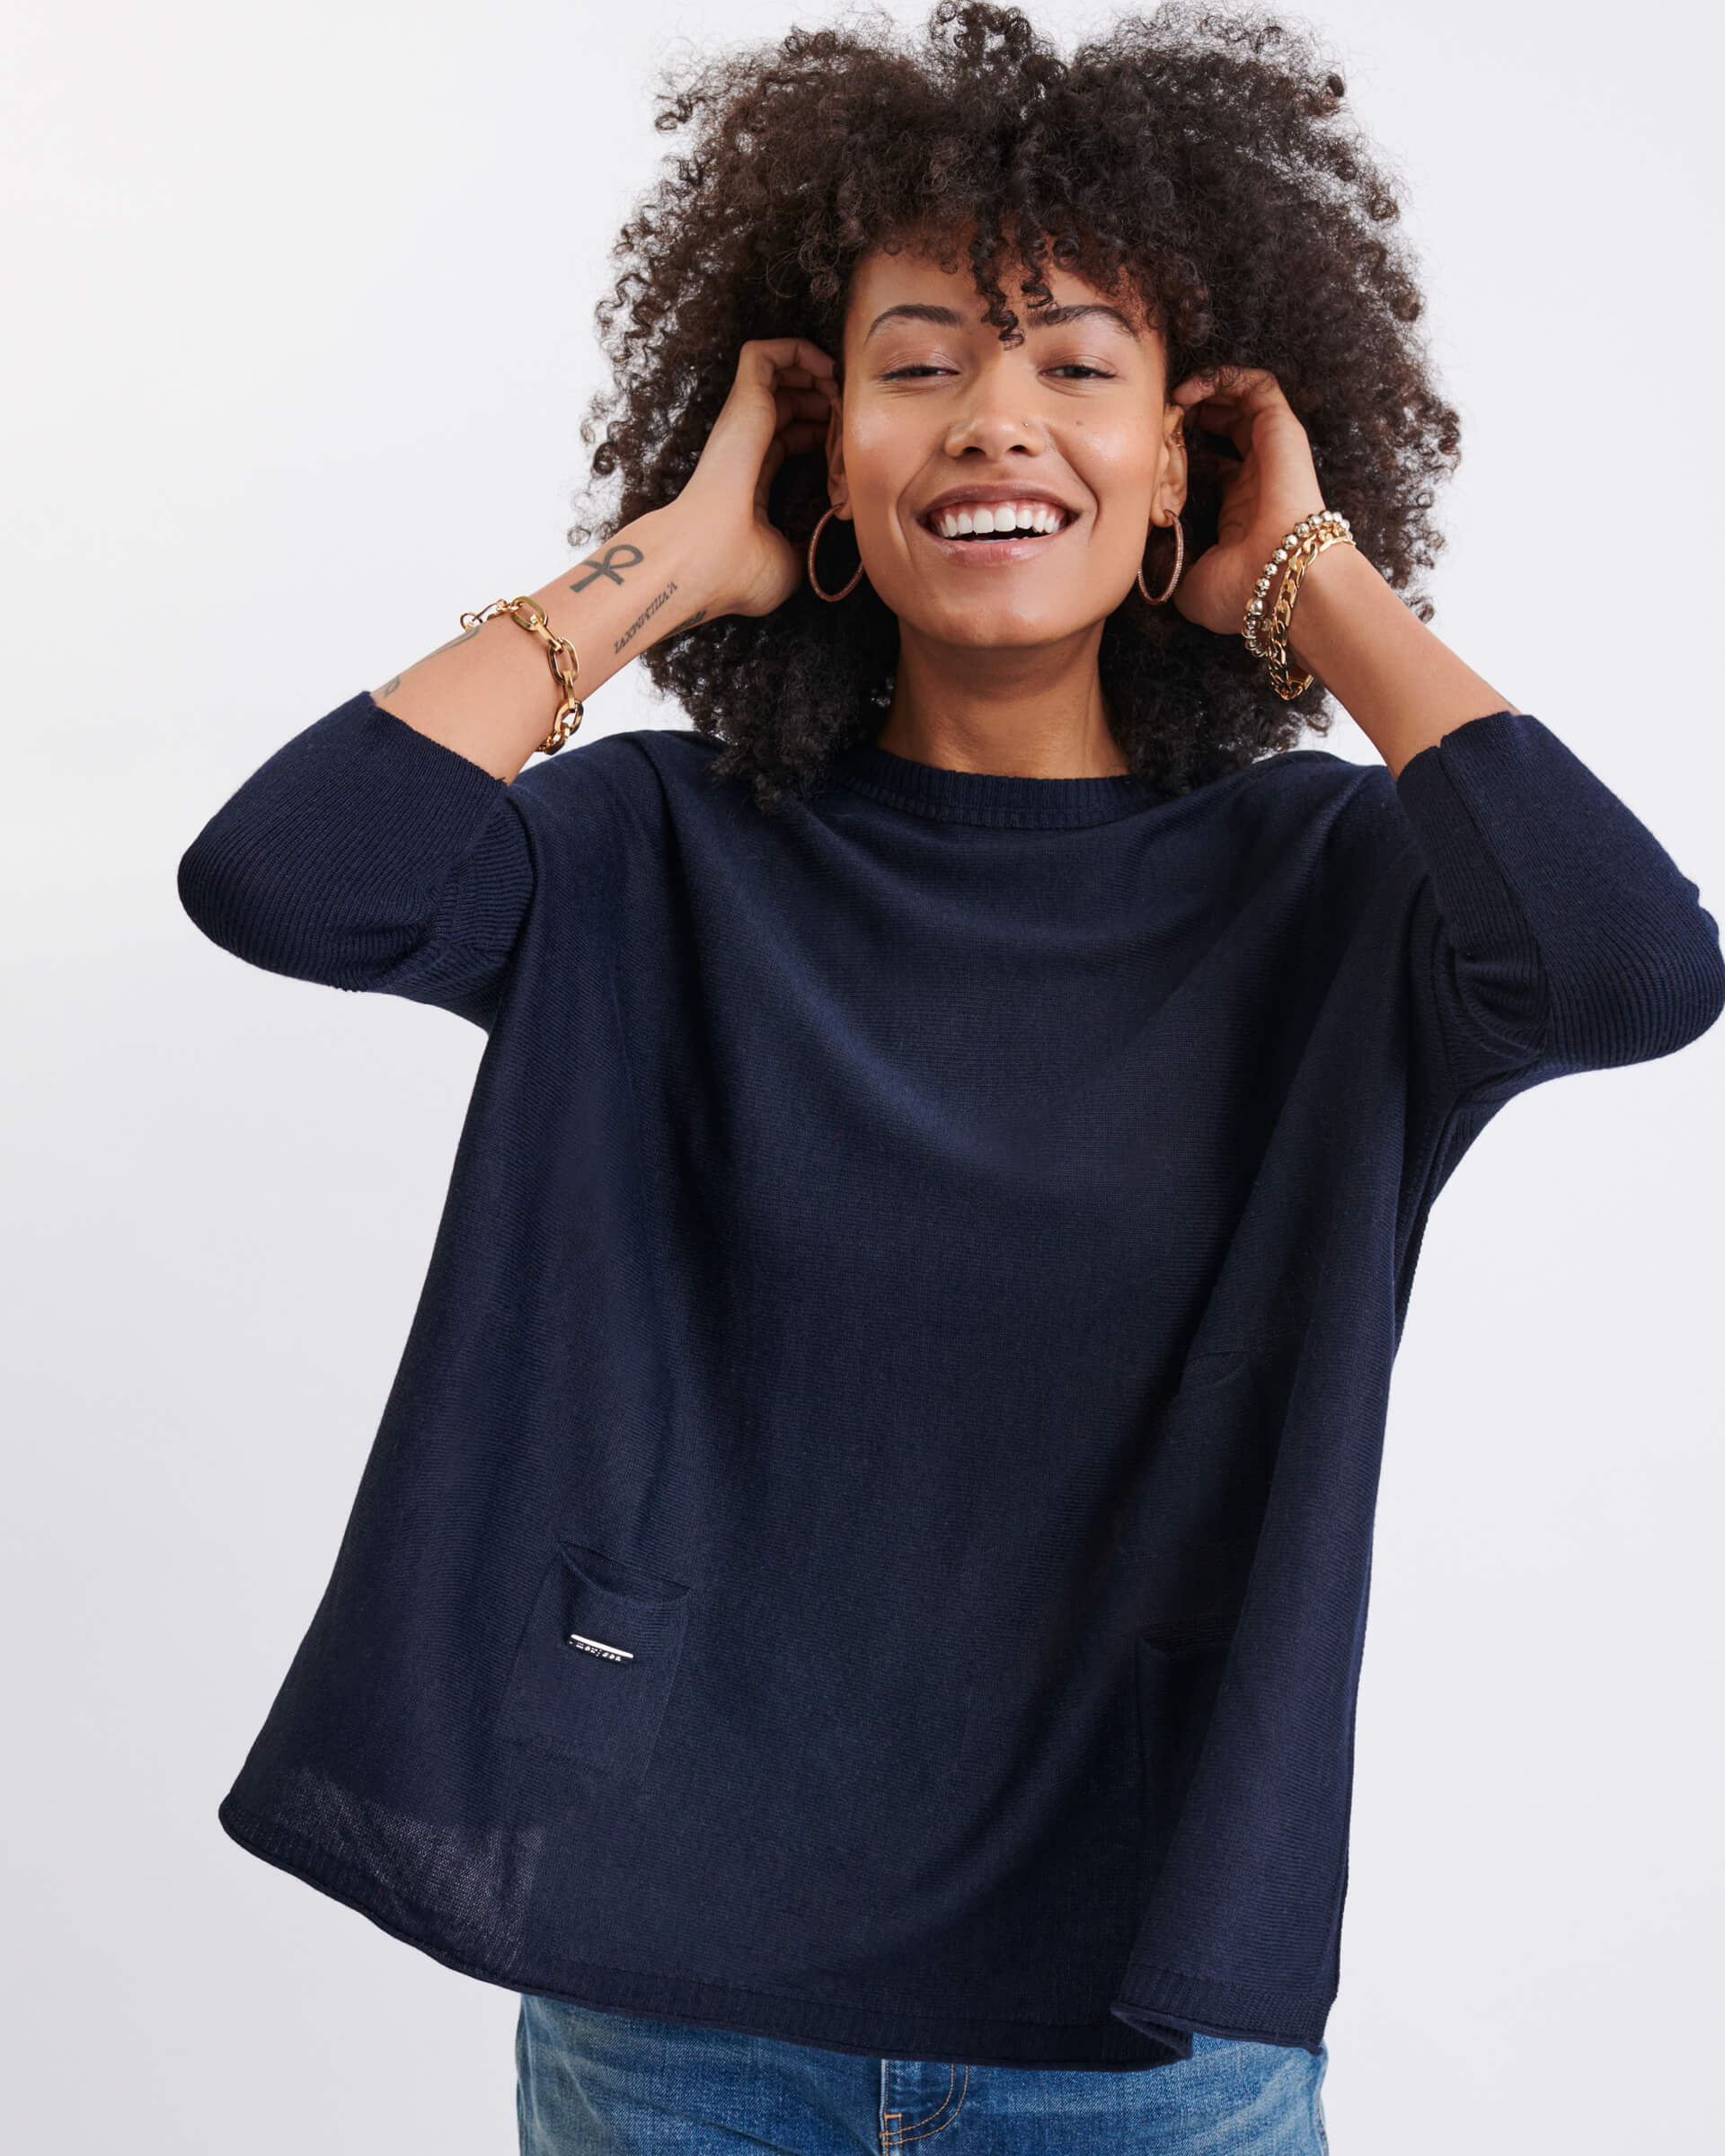 Women's Oversized Crewneck Knit Sweater in Navy Chest View Drape of Fabric